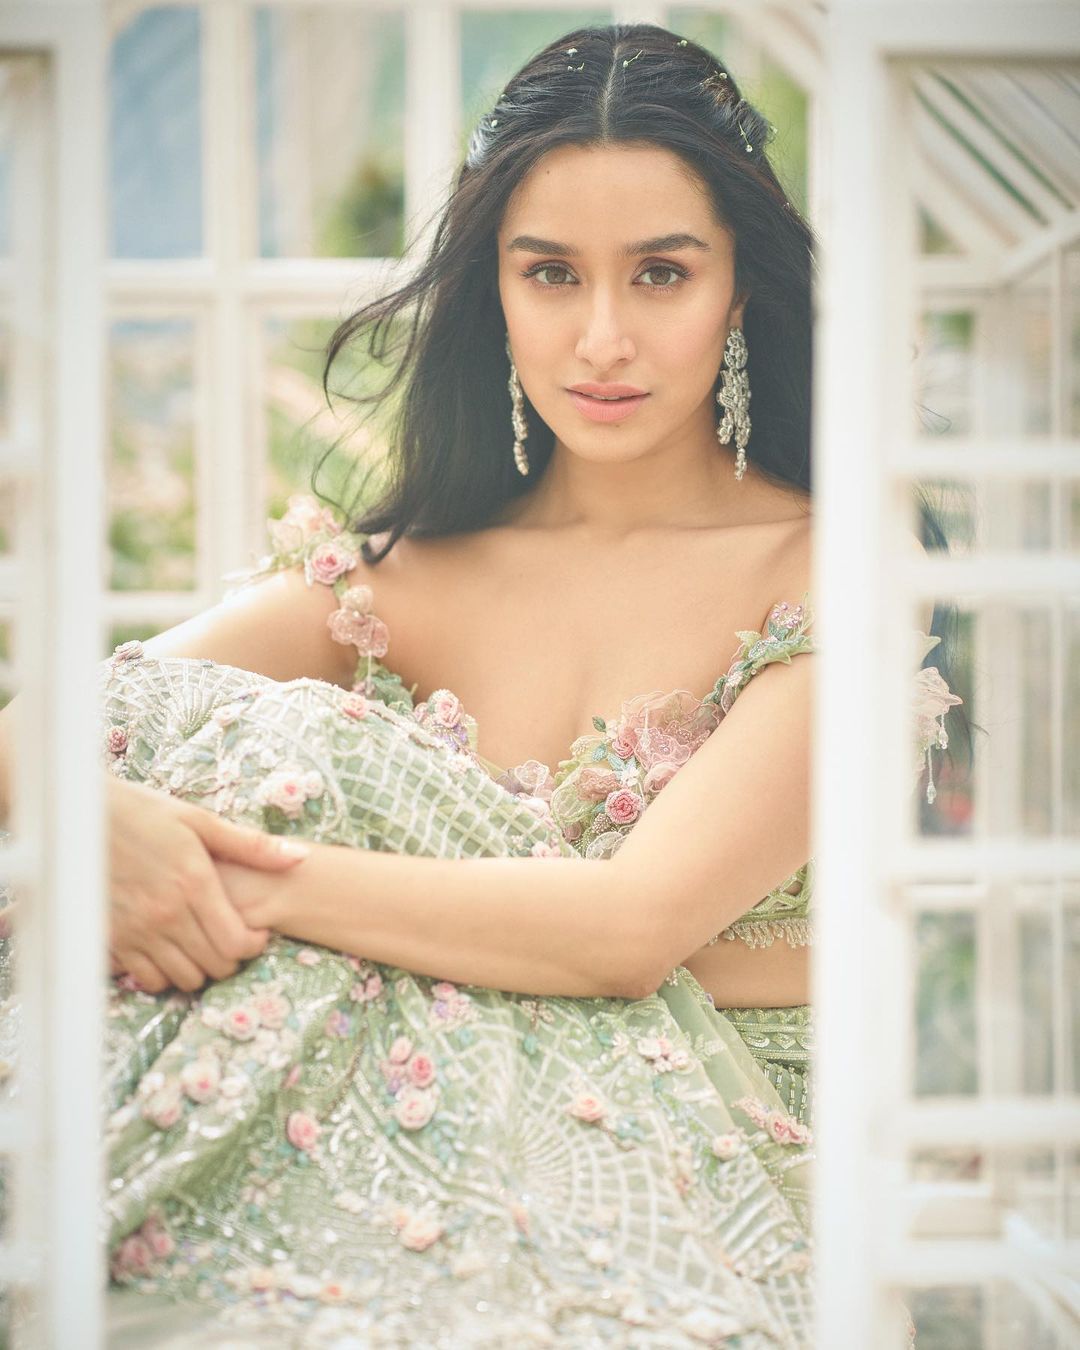 Keeping it real, feat short hairdo gal Shraddha Kapoor | Times of India